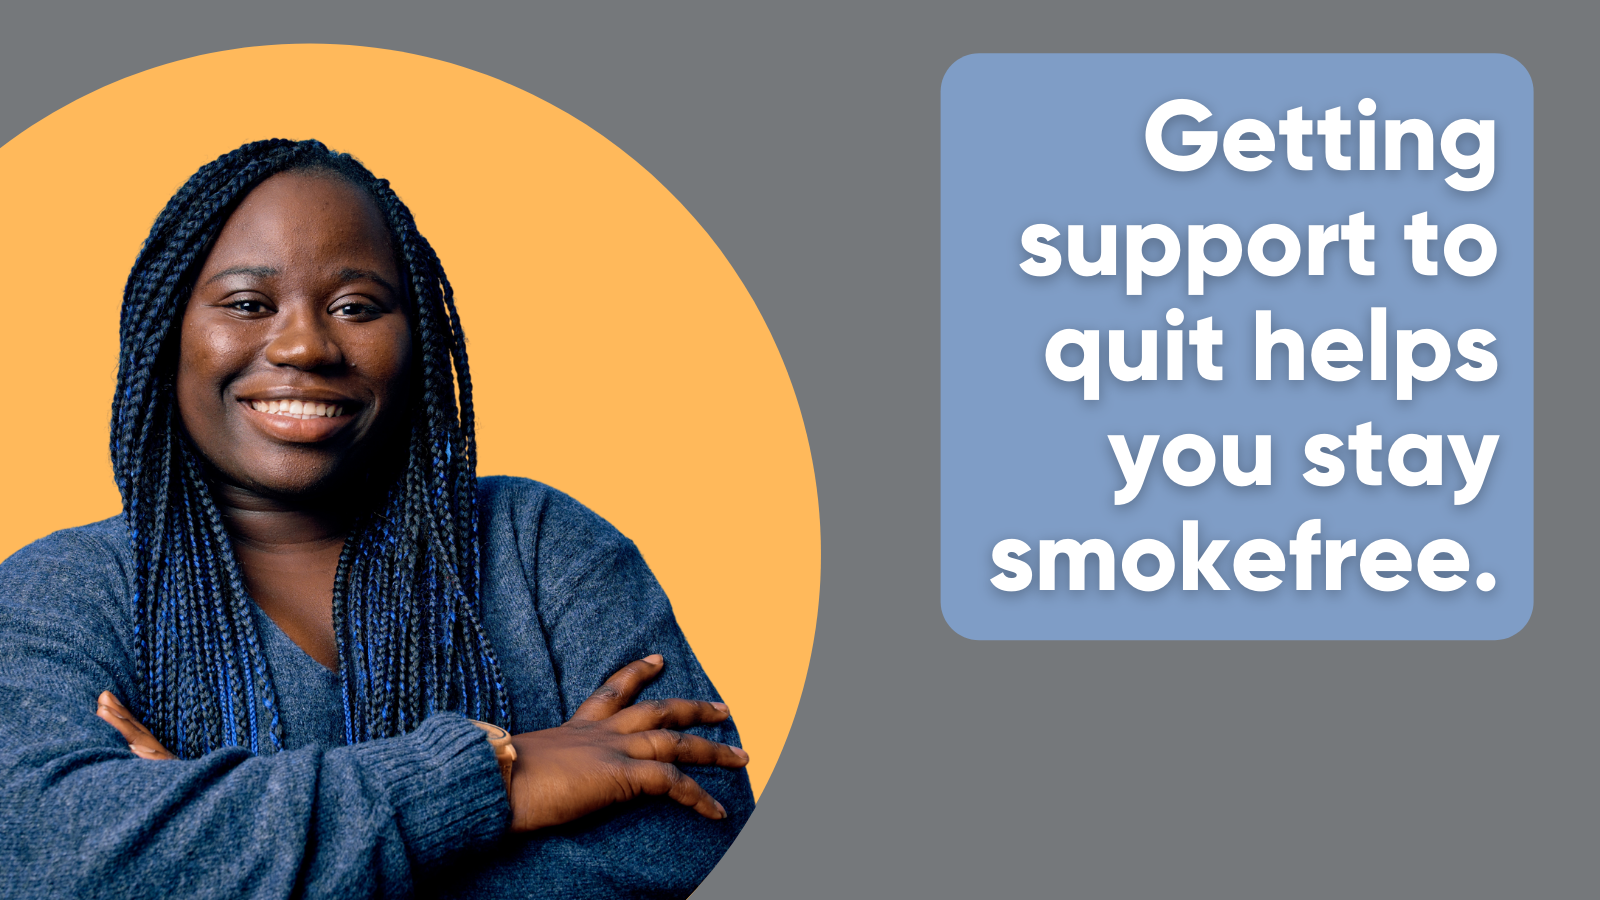 Getting support to quit helps you stay smokefree.